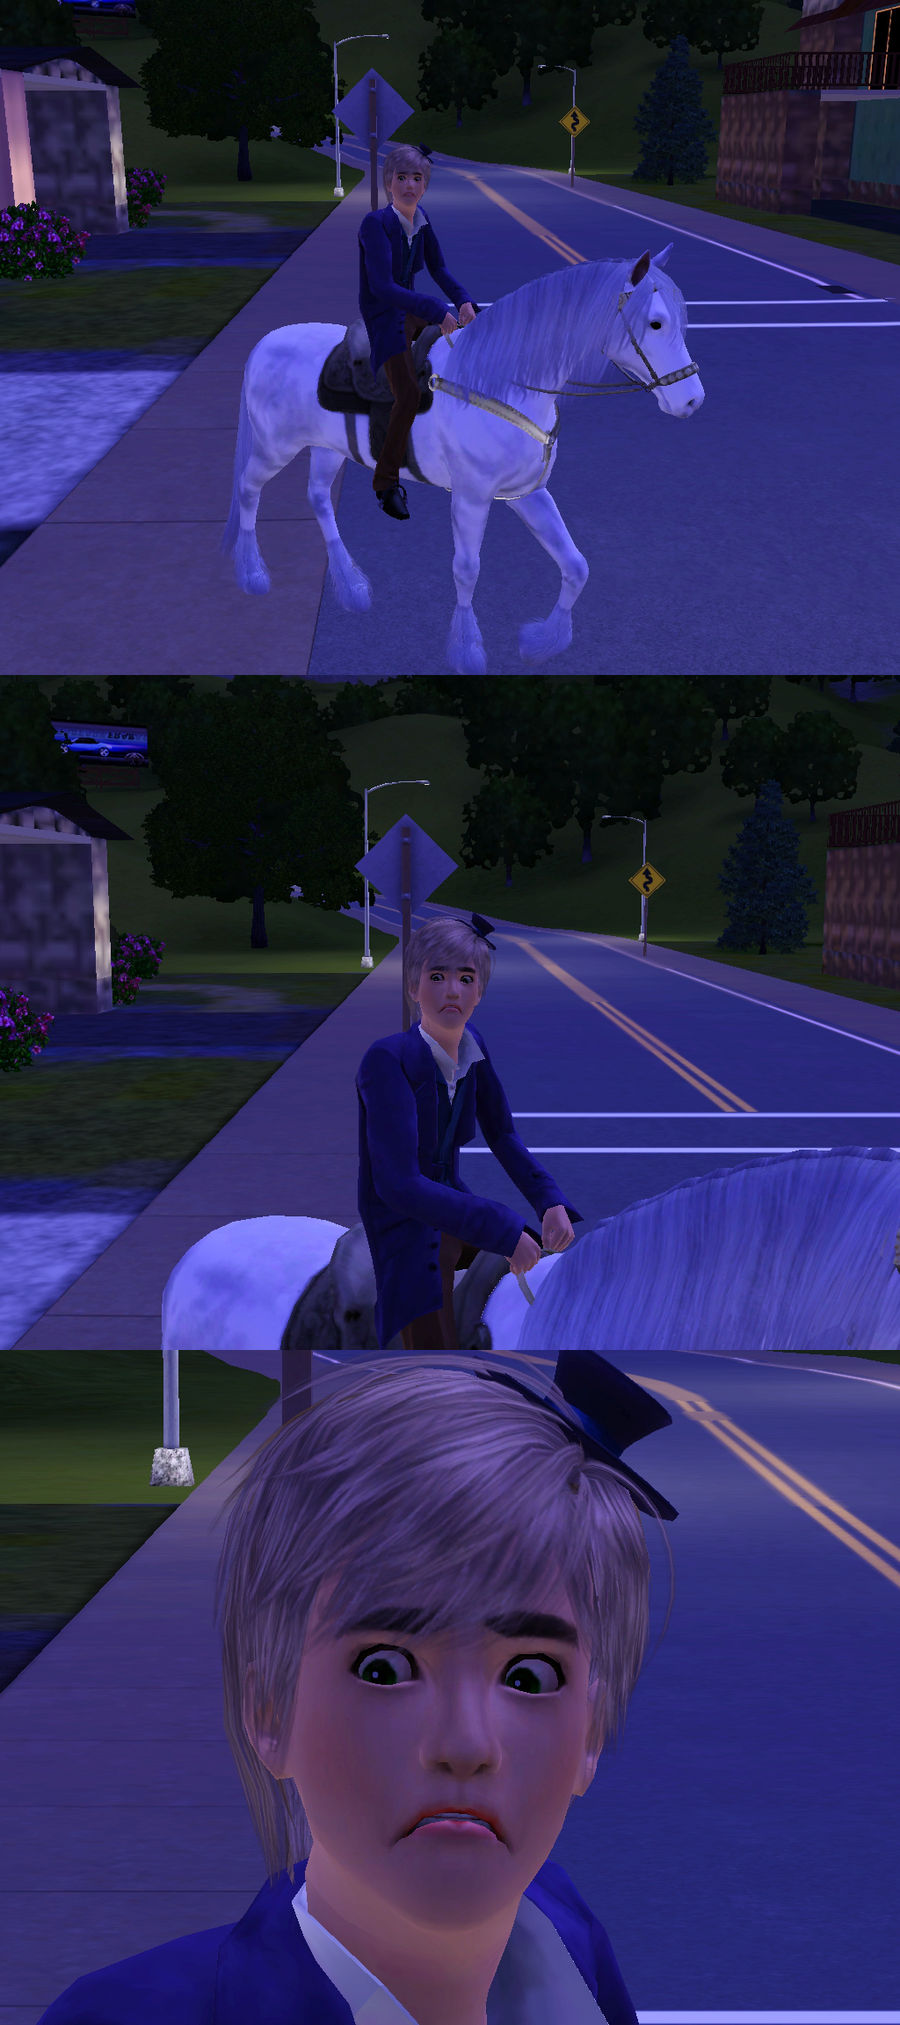 Sims 3: England does not like horses